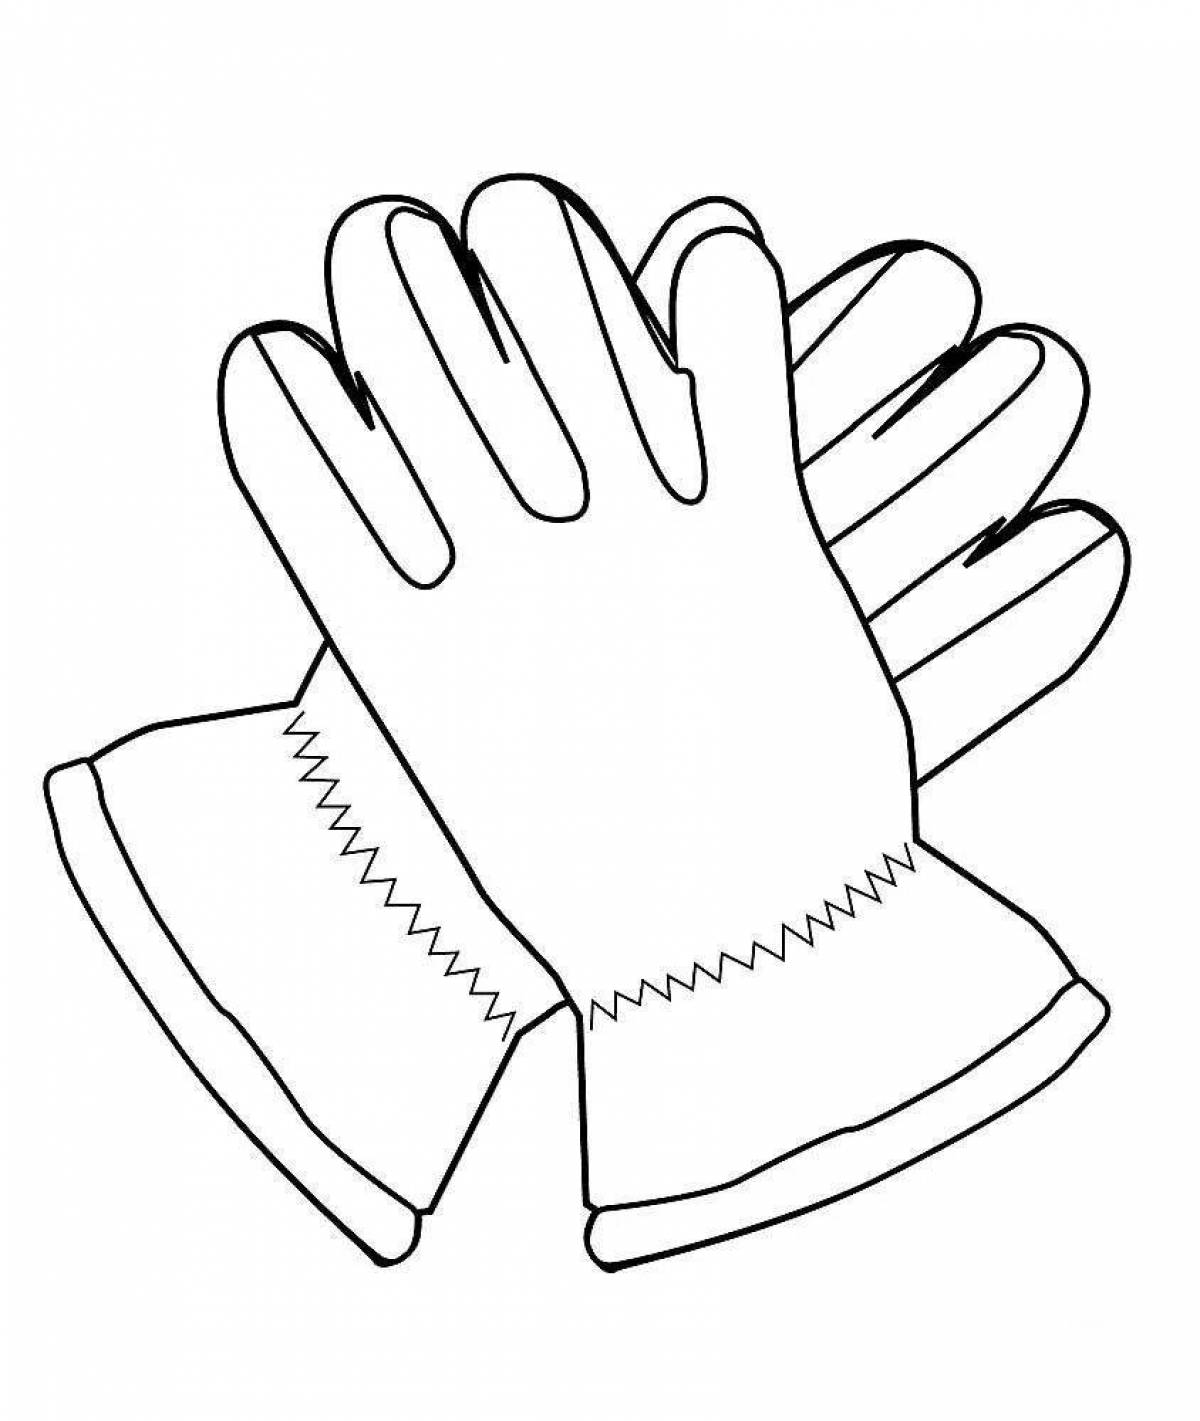 Incredible gloves coloring book for kids